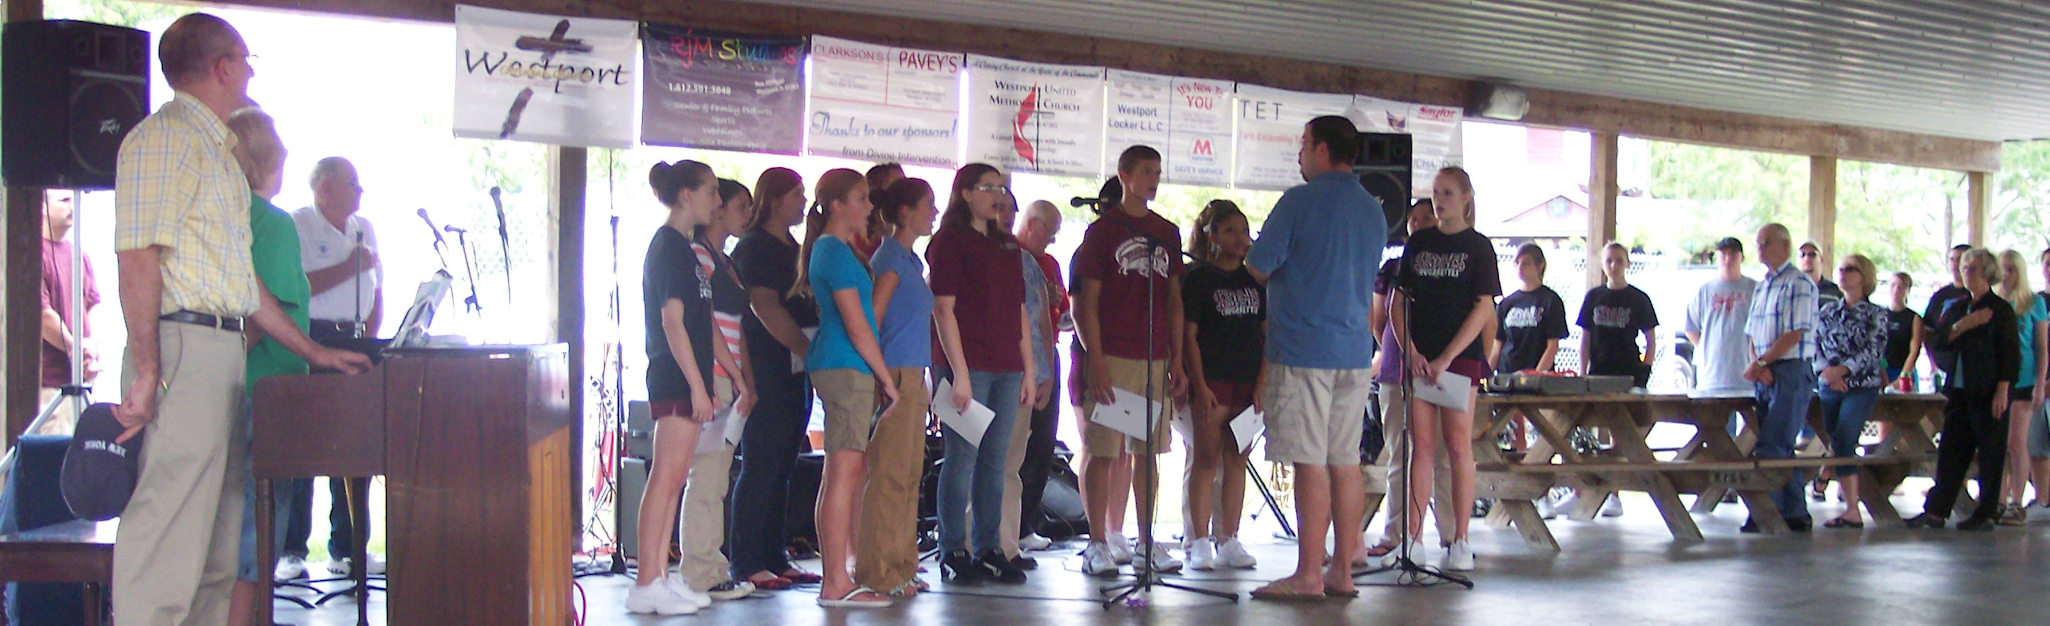 Photo of a group of teens singing under the shelter house